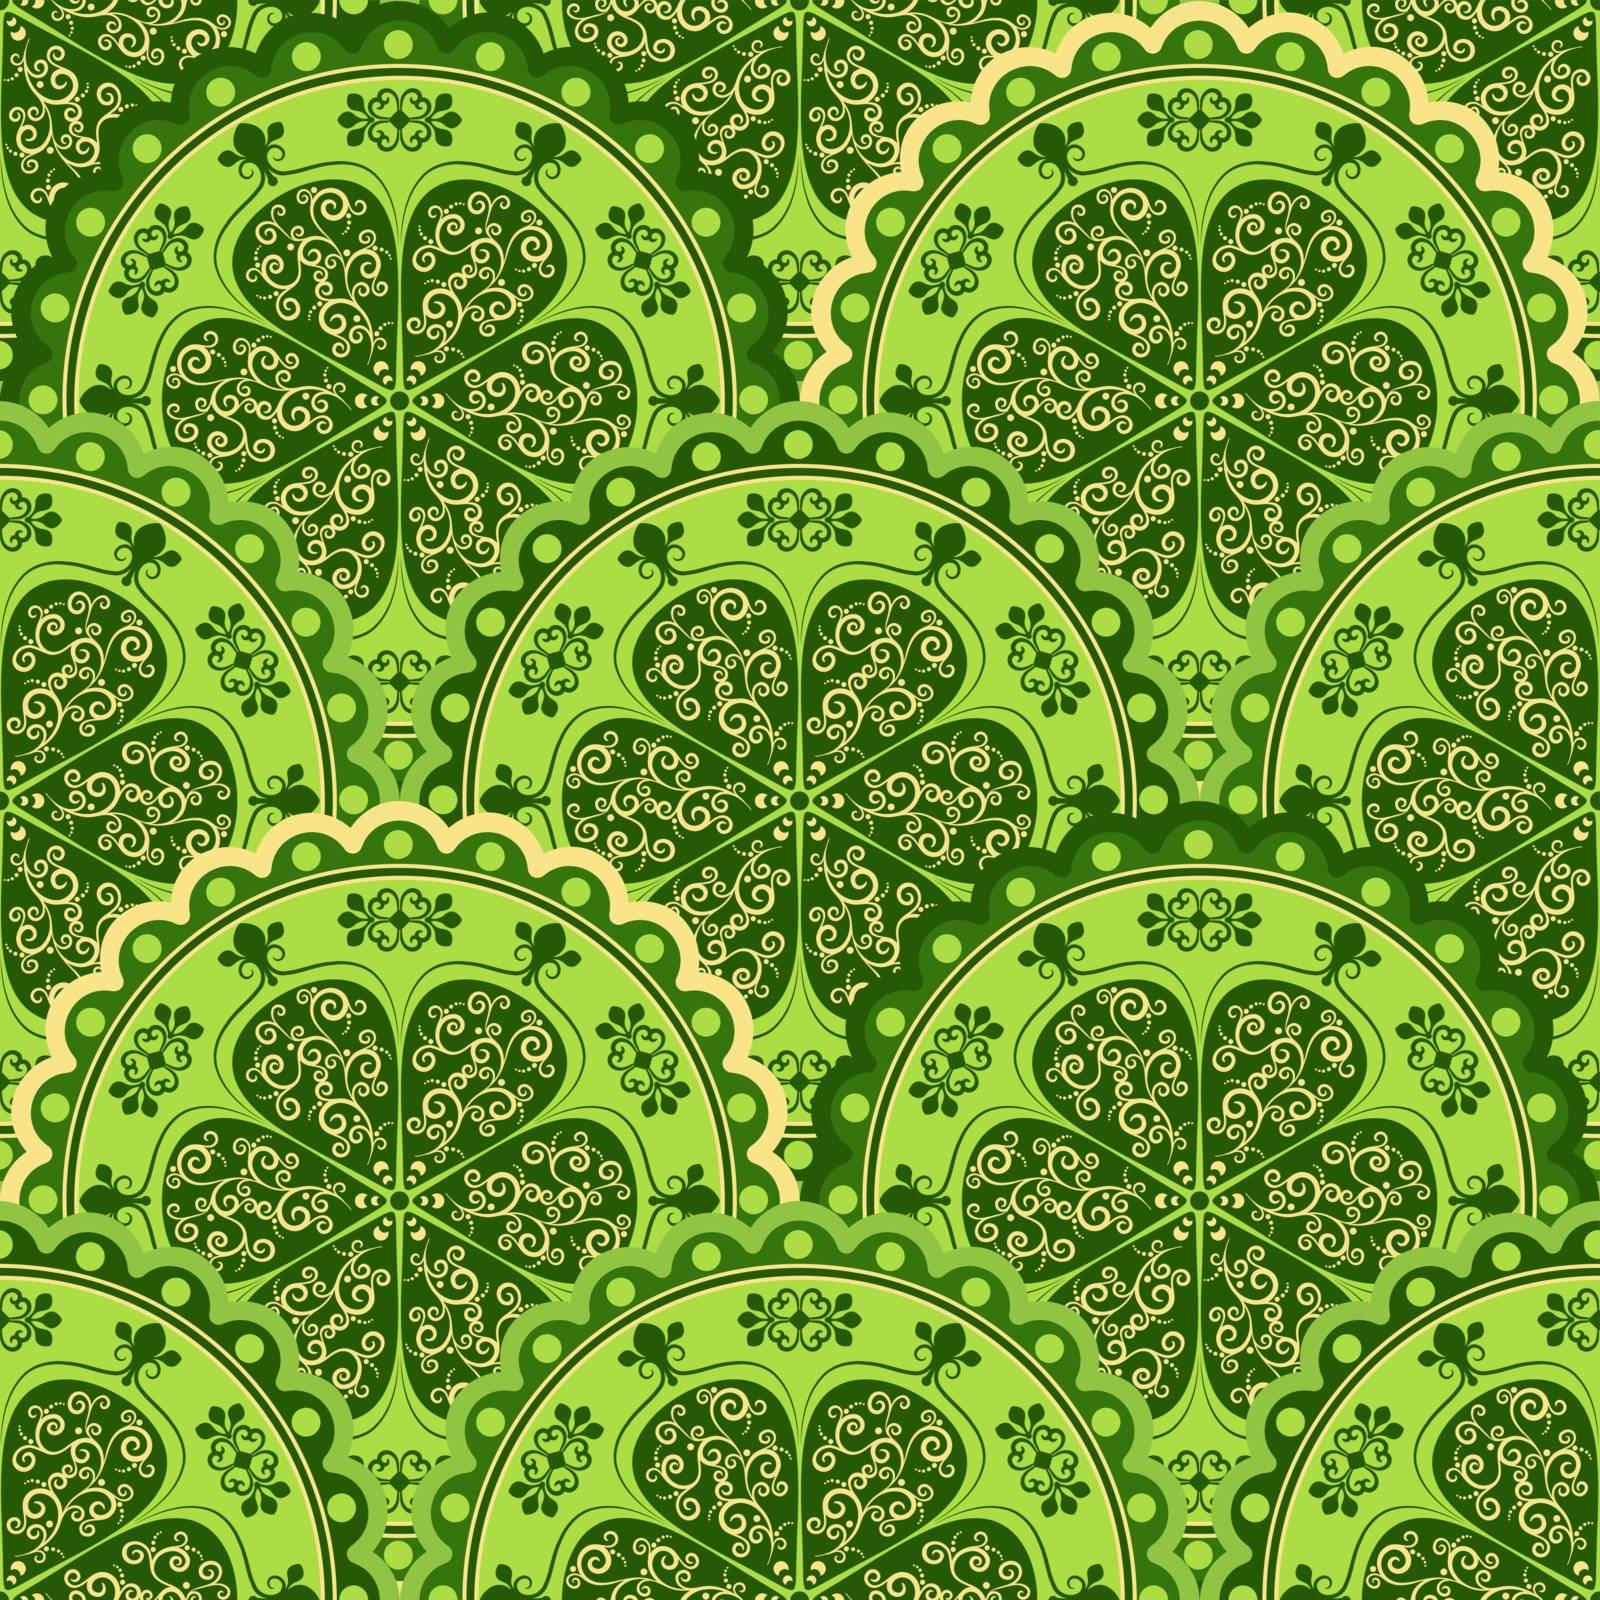 Green-yellow vintage seamless pattern by OlgaDrozd